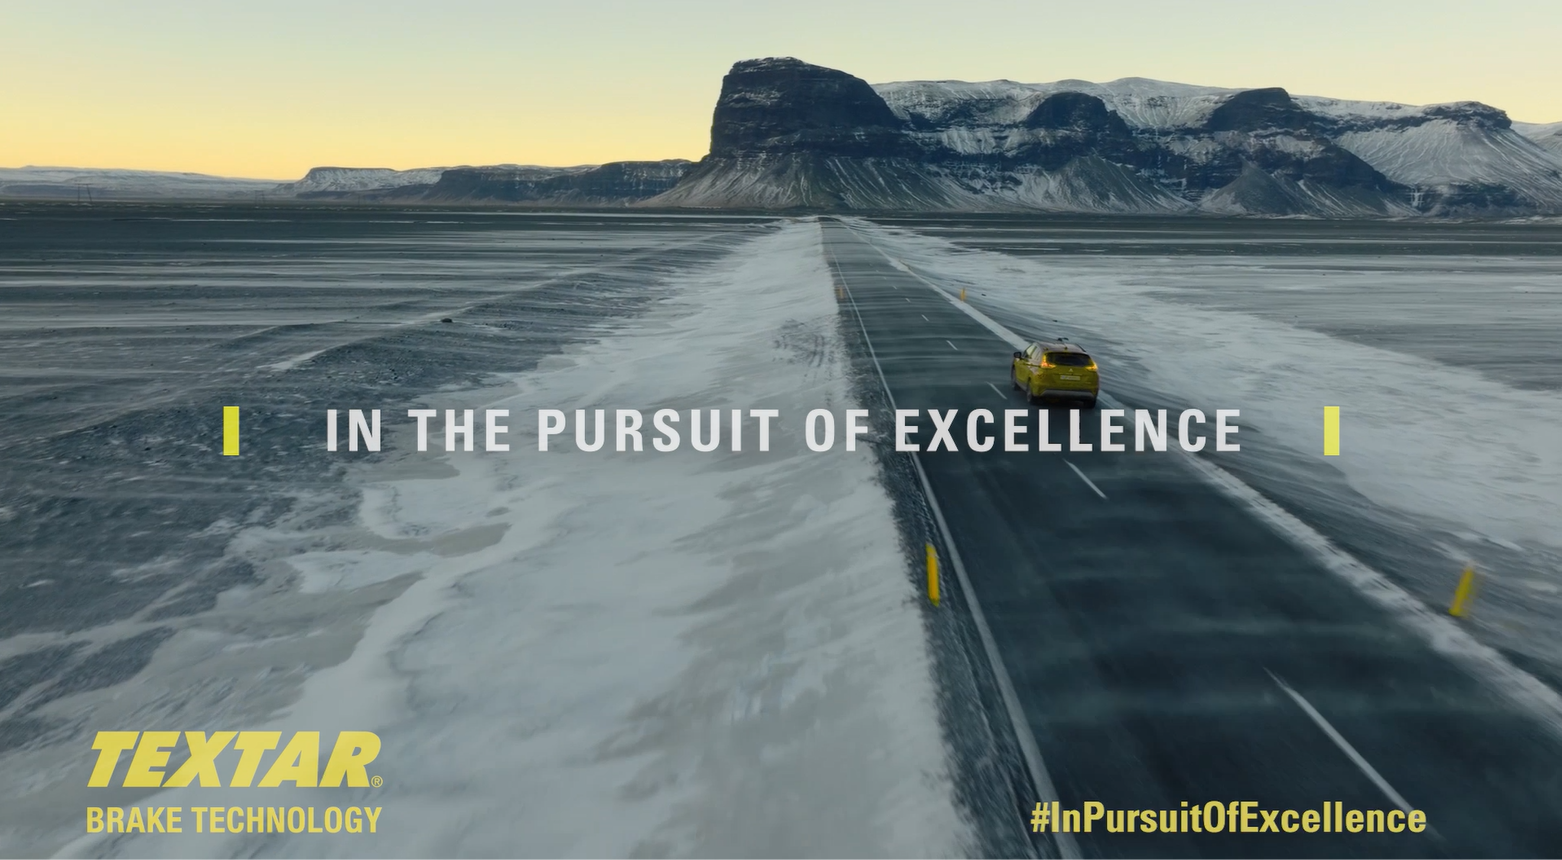 Textar's Pursuit of Excellence